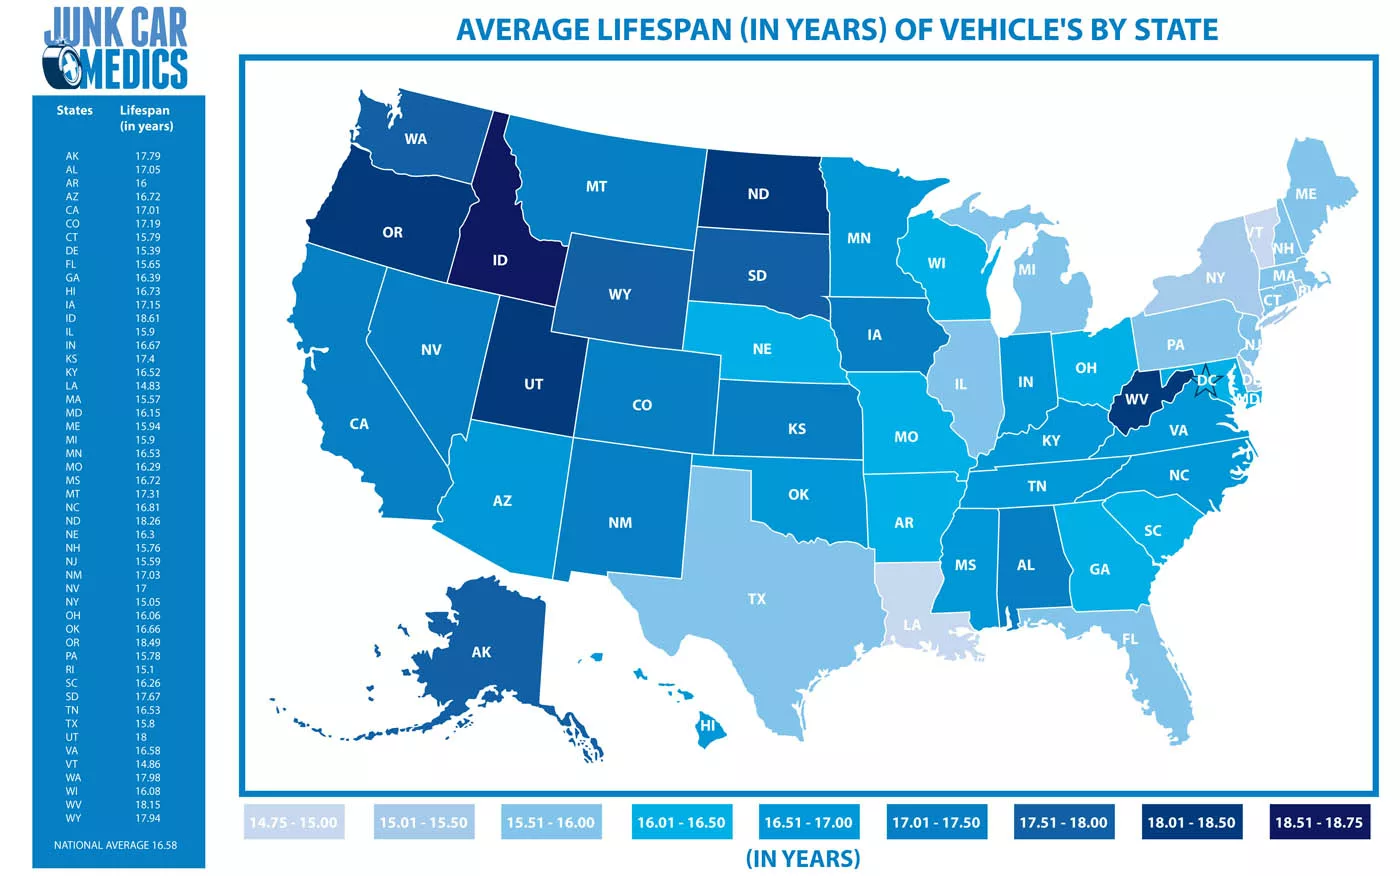 Average lifespan of vehicles by state